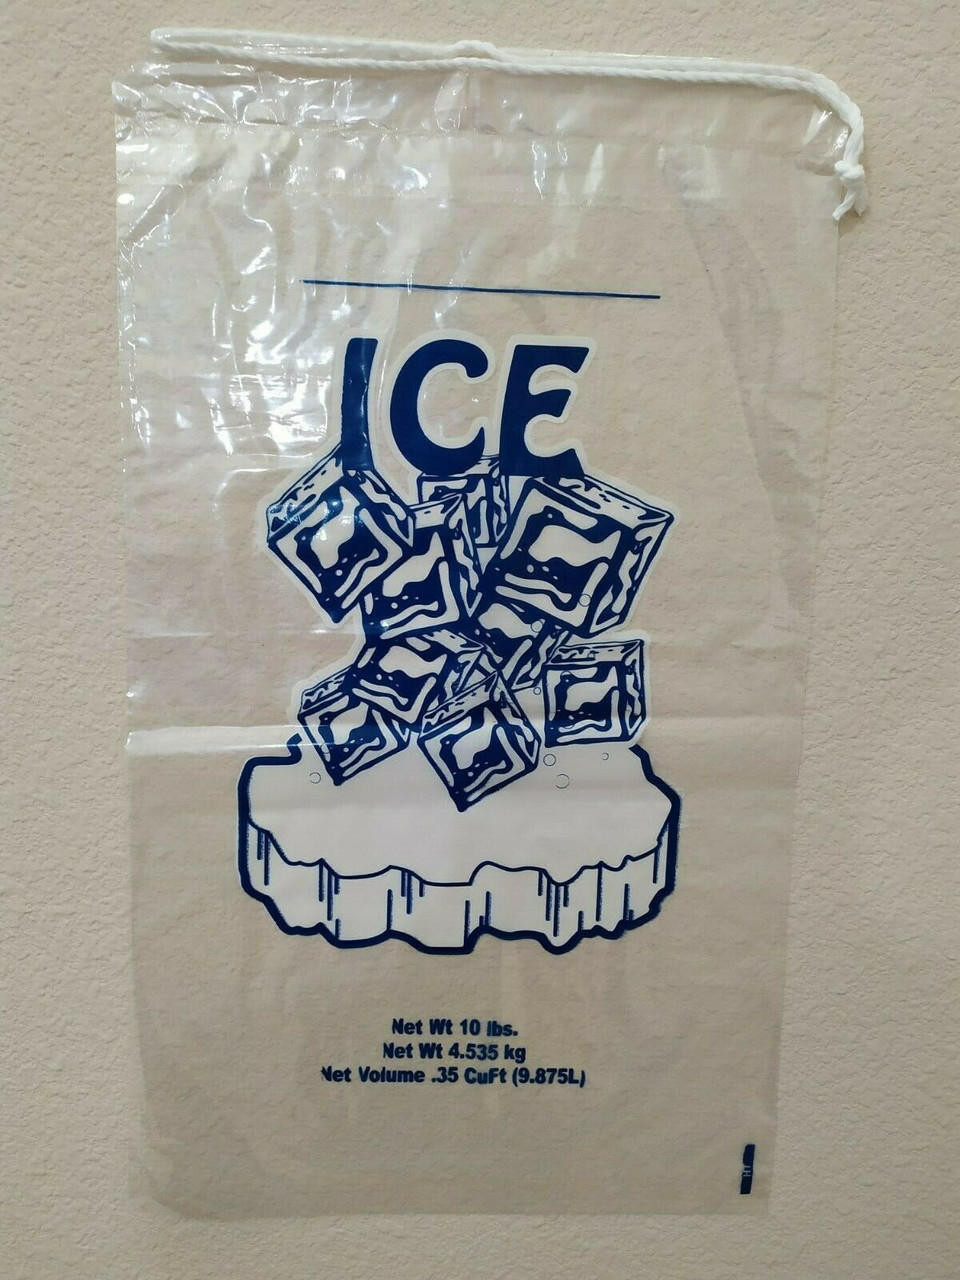 https://cdn11.bigcommerce.com/s-zrh8tkpr8d/images/stencil/1280x1280/products/9864/33740/10-lb-lbs-1.5-mil-plastic-commercial-ice-bag-bags-with-cotton-drawstring-100-pcs__72455.1701597846.jpg?c=2&imbypass=on